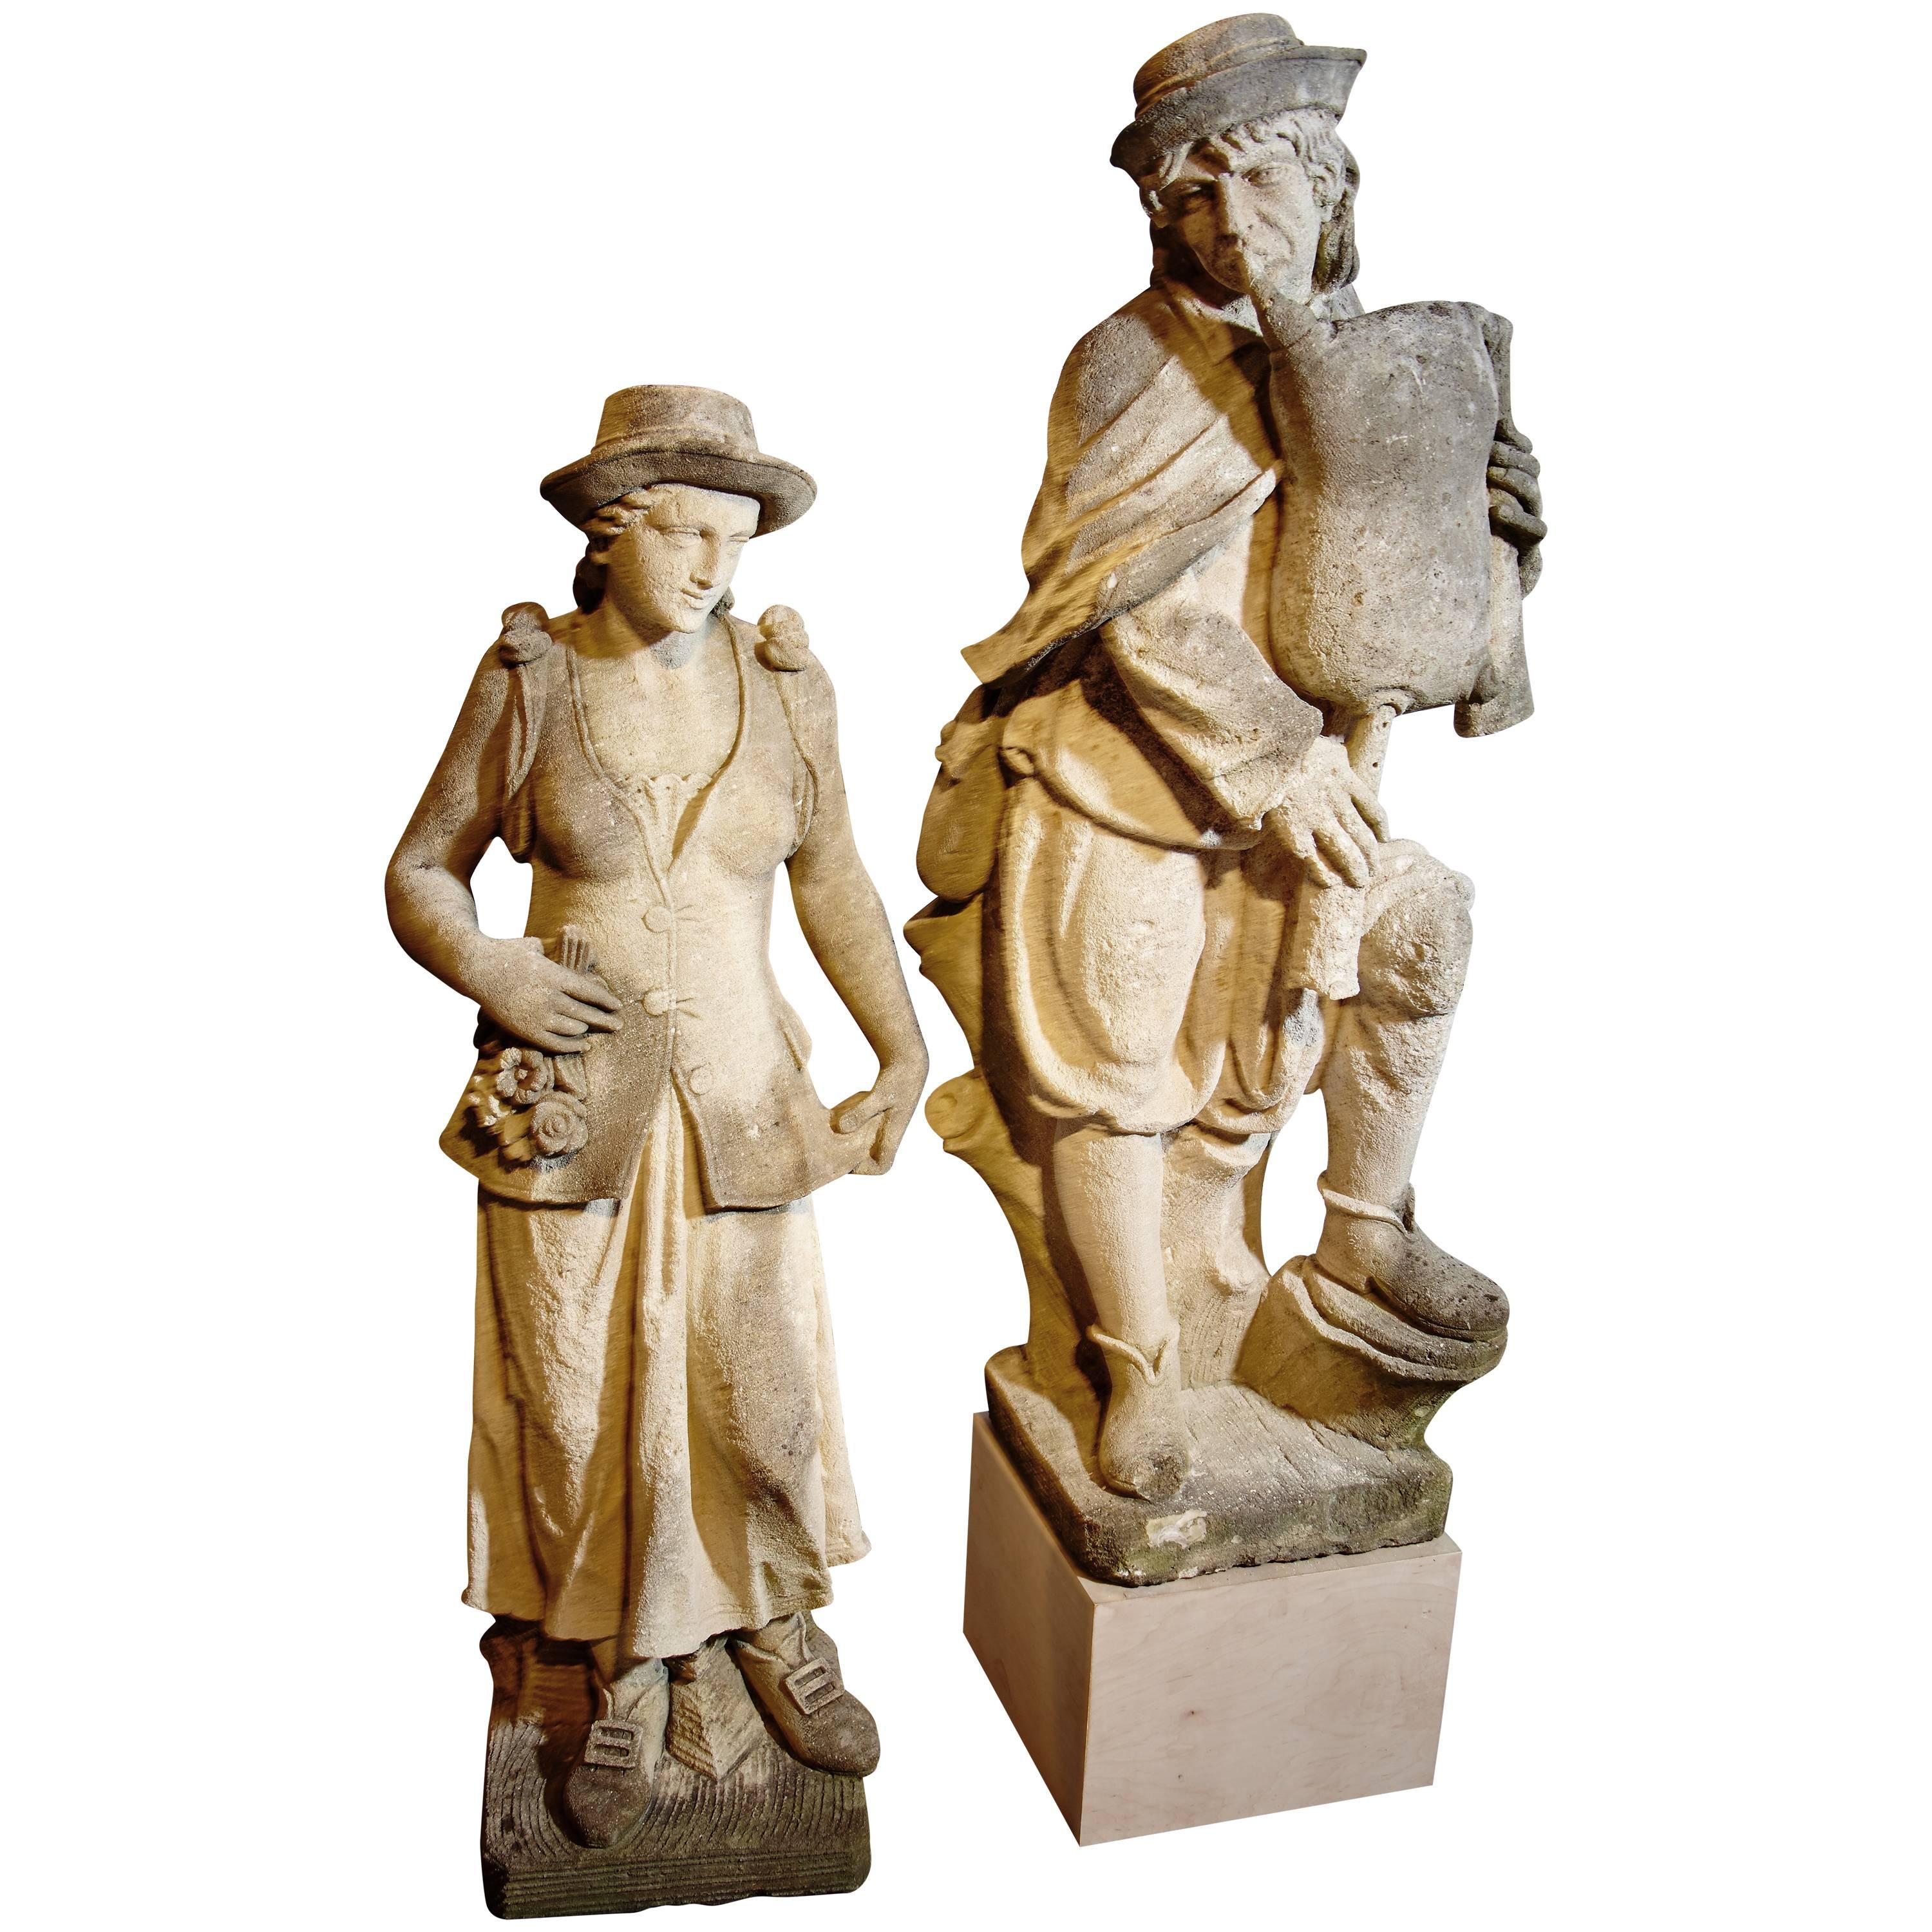 Hand-Carved Vicenza Nearly Life-sized Stone Statues of Young Couple